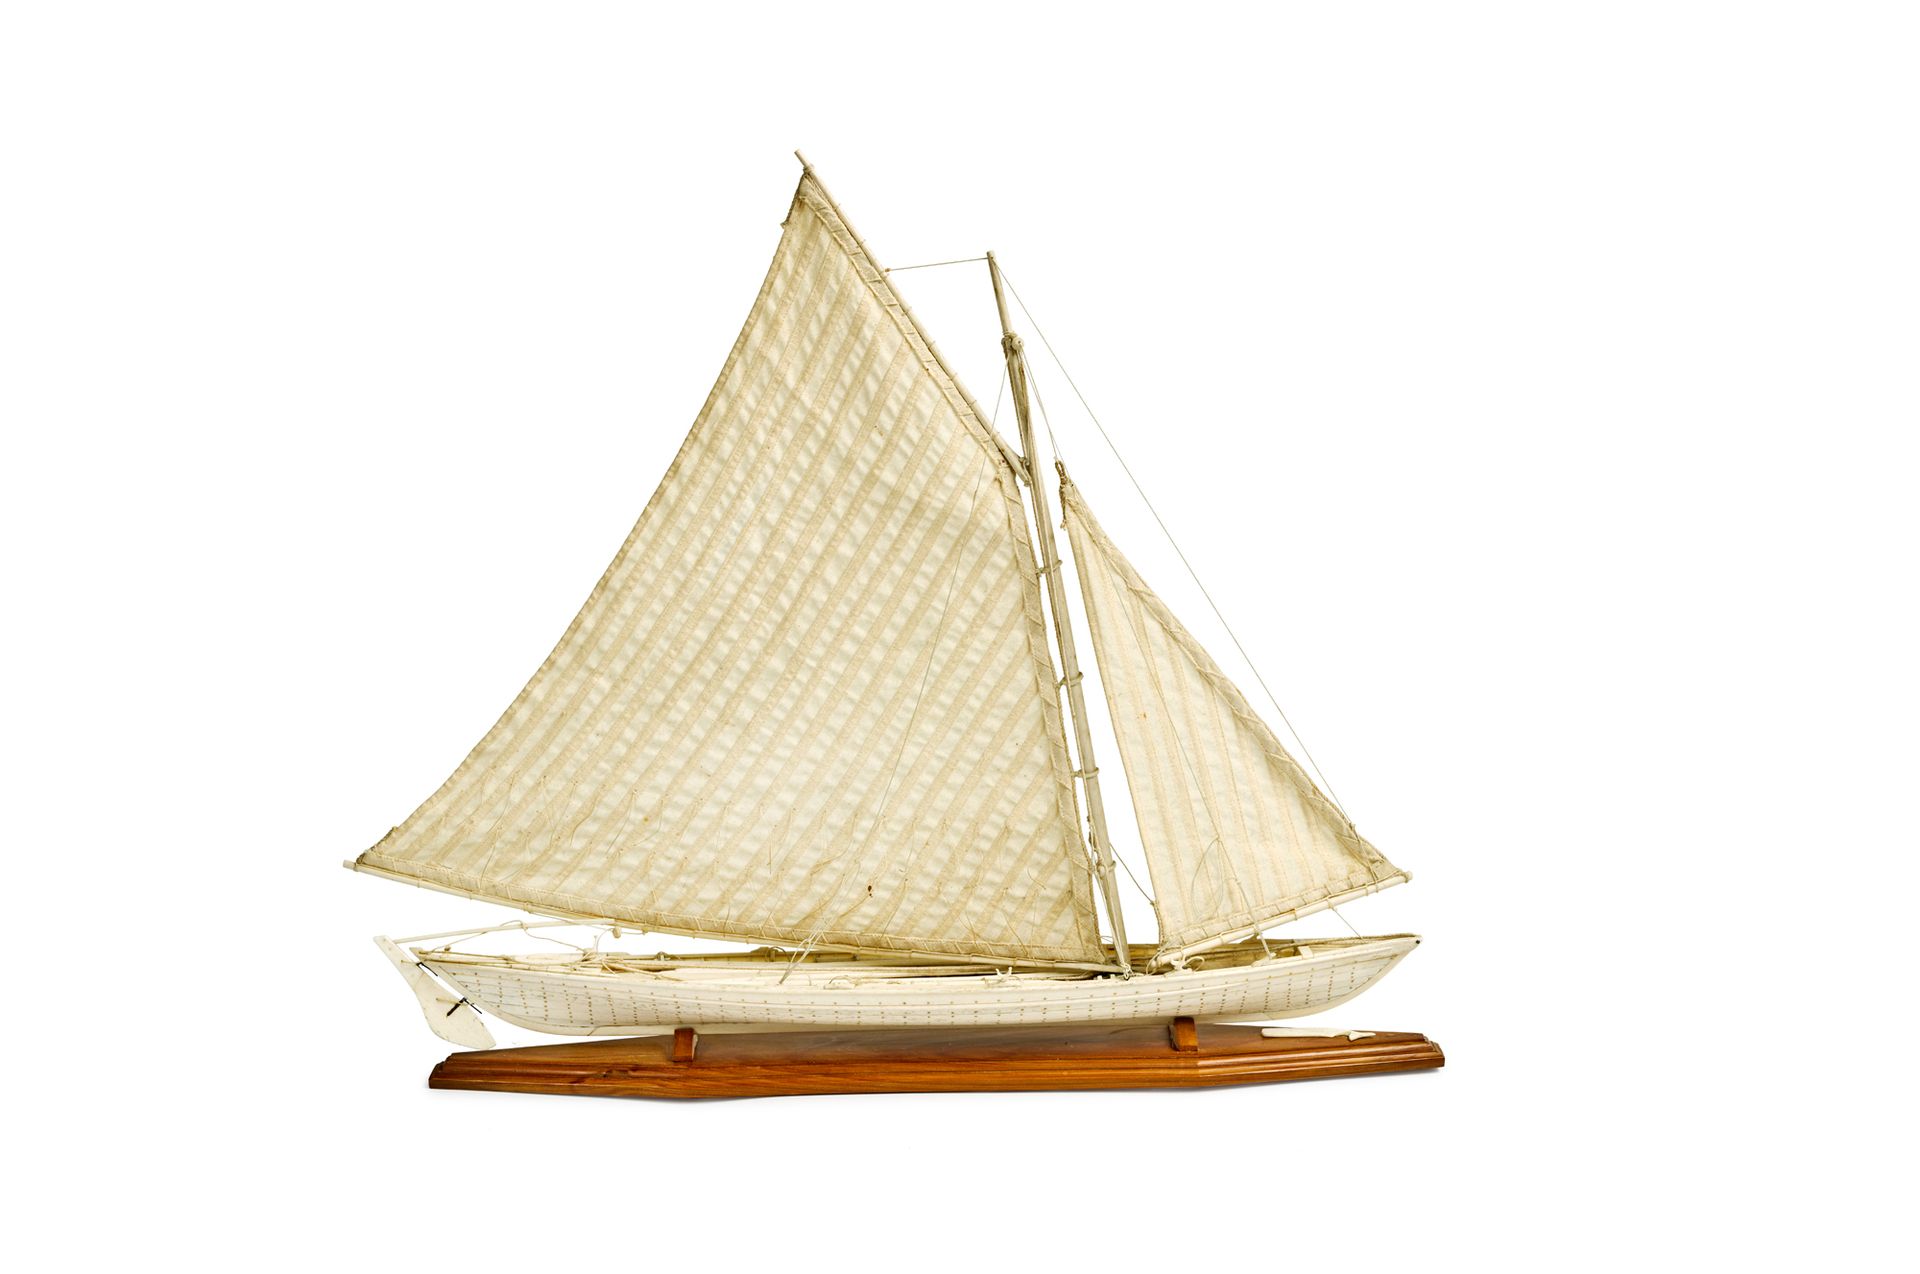 Null Model of a bone whaleboat on a wooden base
Complete with sails, harpoon, sp&hellip;